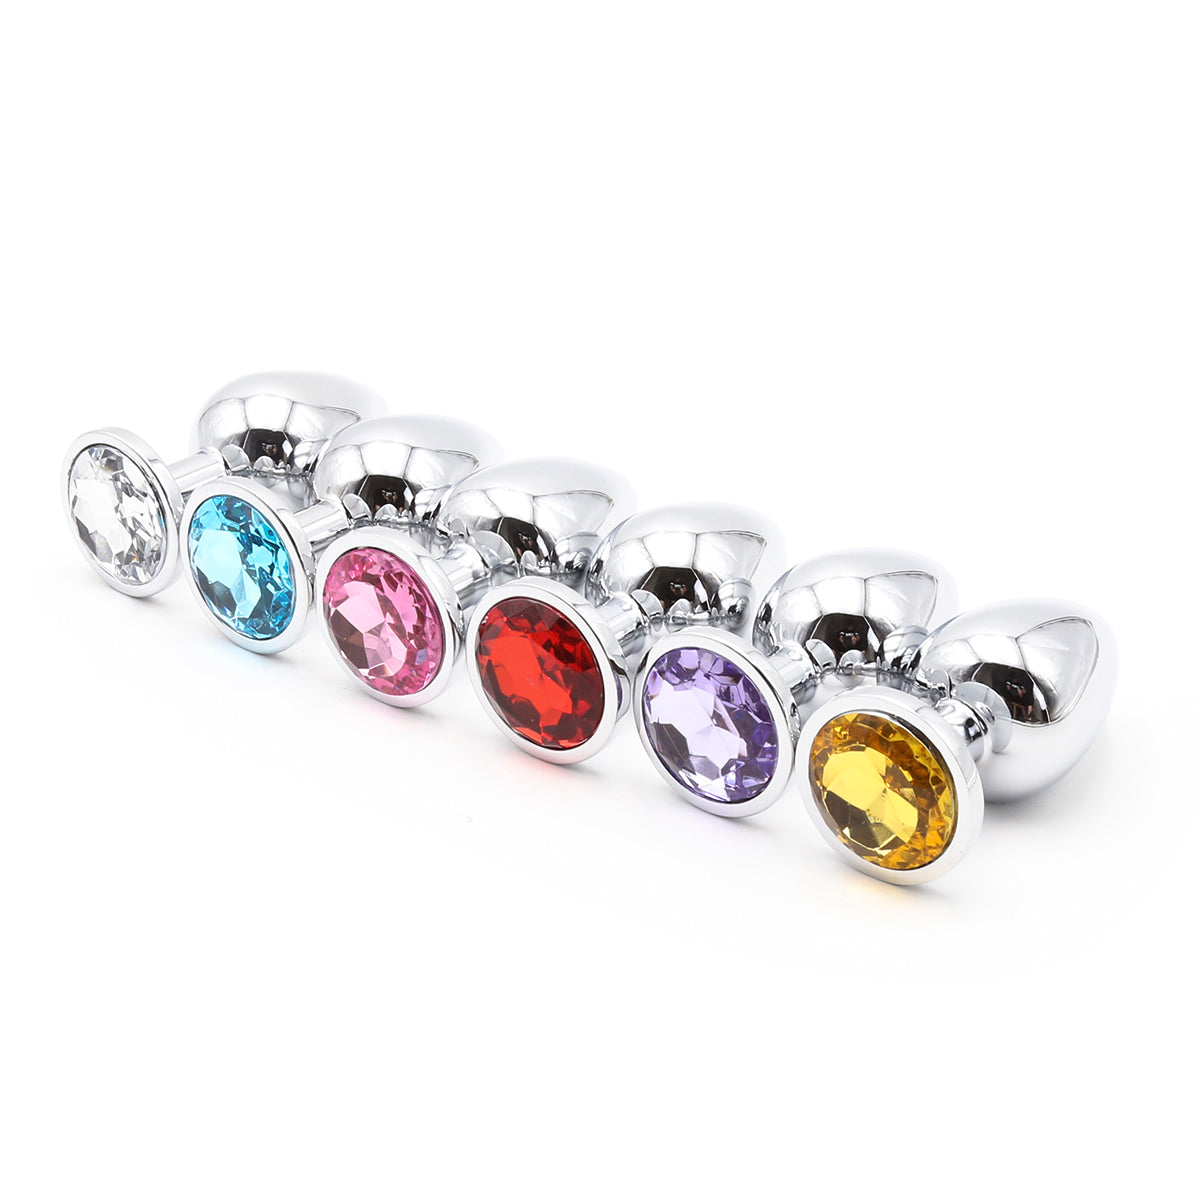 Large Size Stainless Metal Butt Plug(Seven Colors Available)